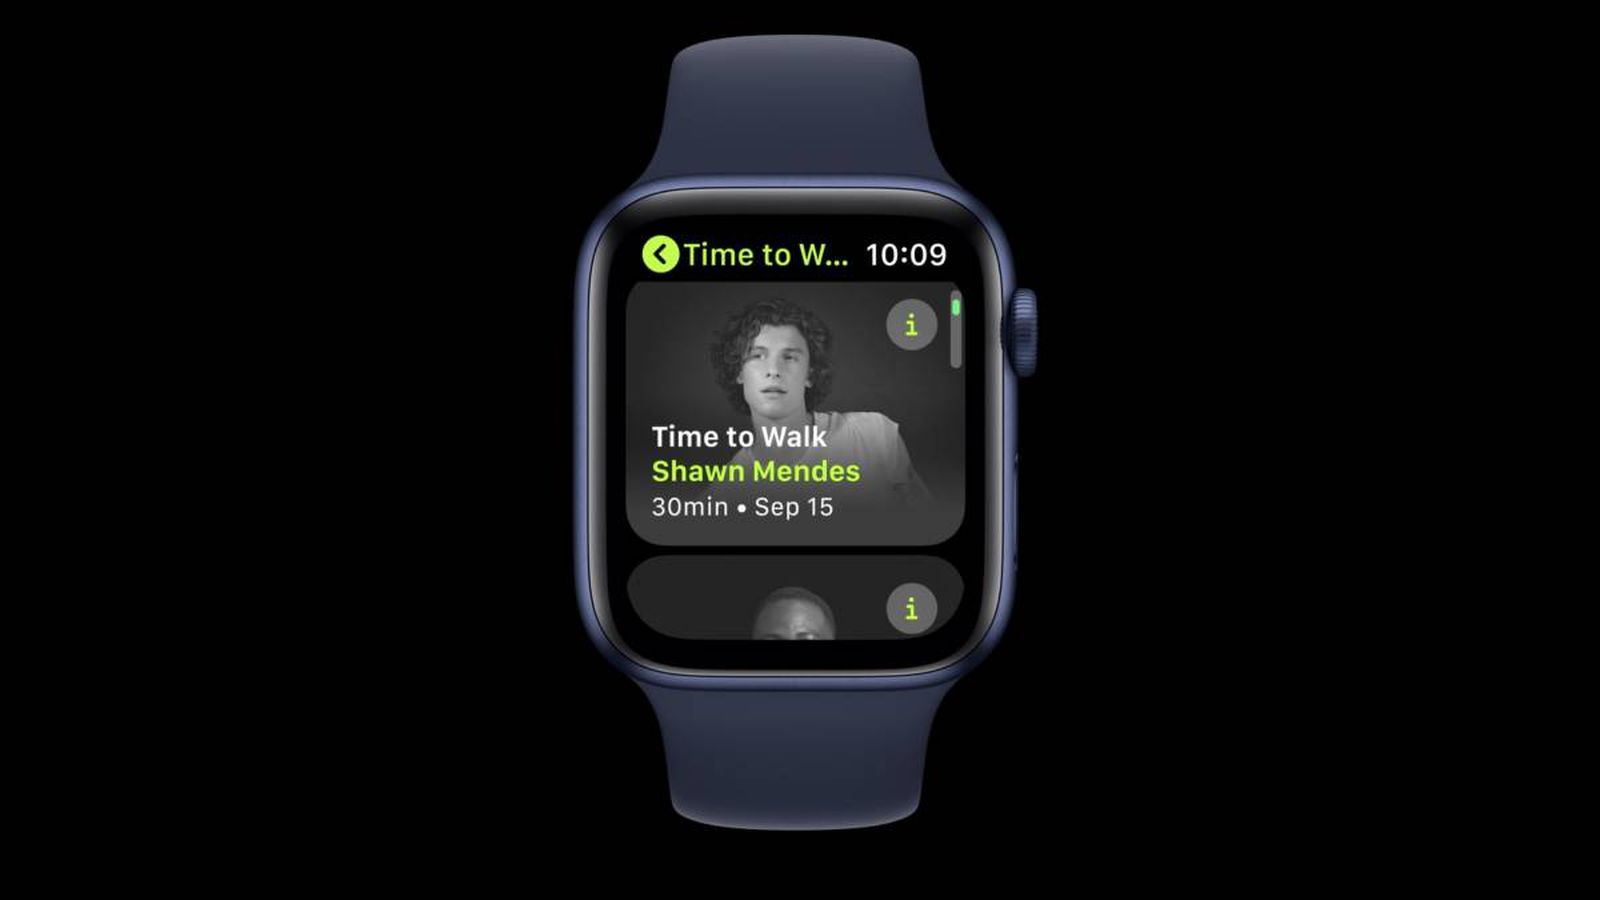 Apple Fitness + Feature ‘Time to Walk’ to be released soon with audio stories from special guests